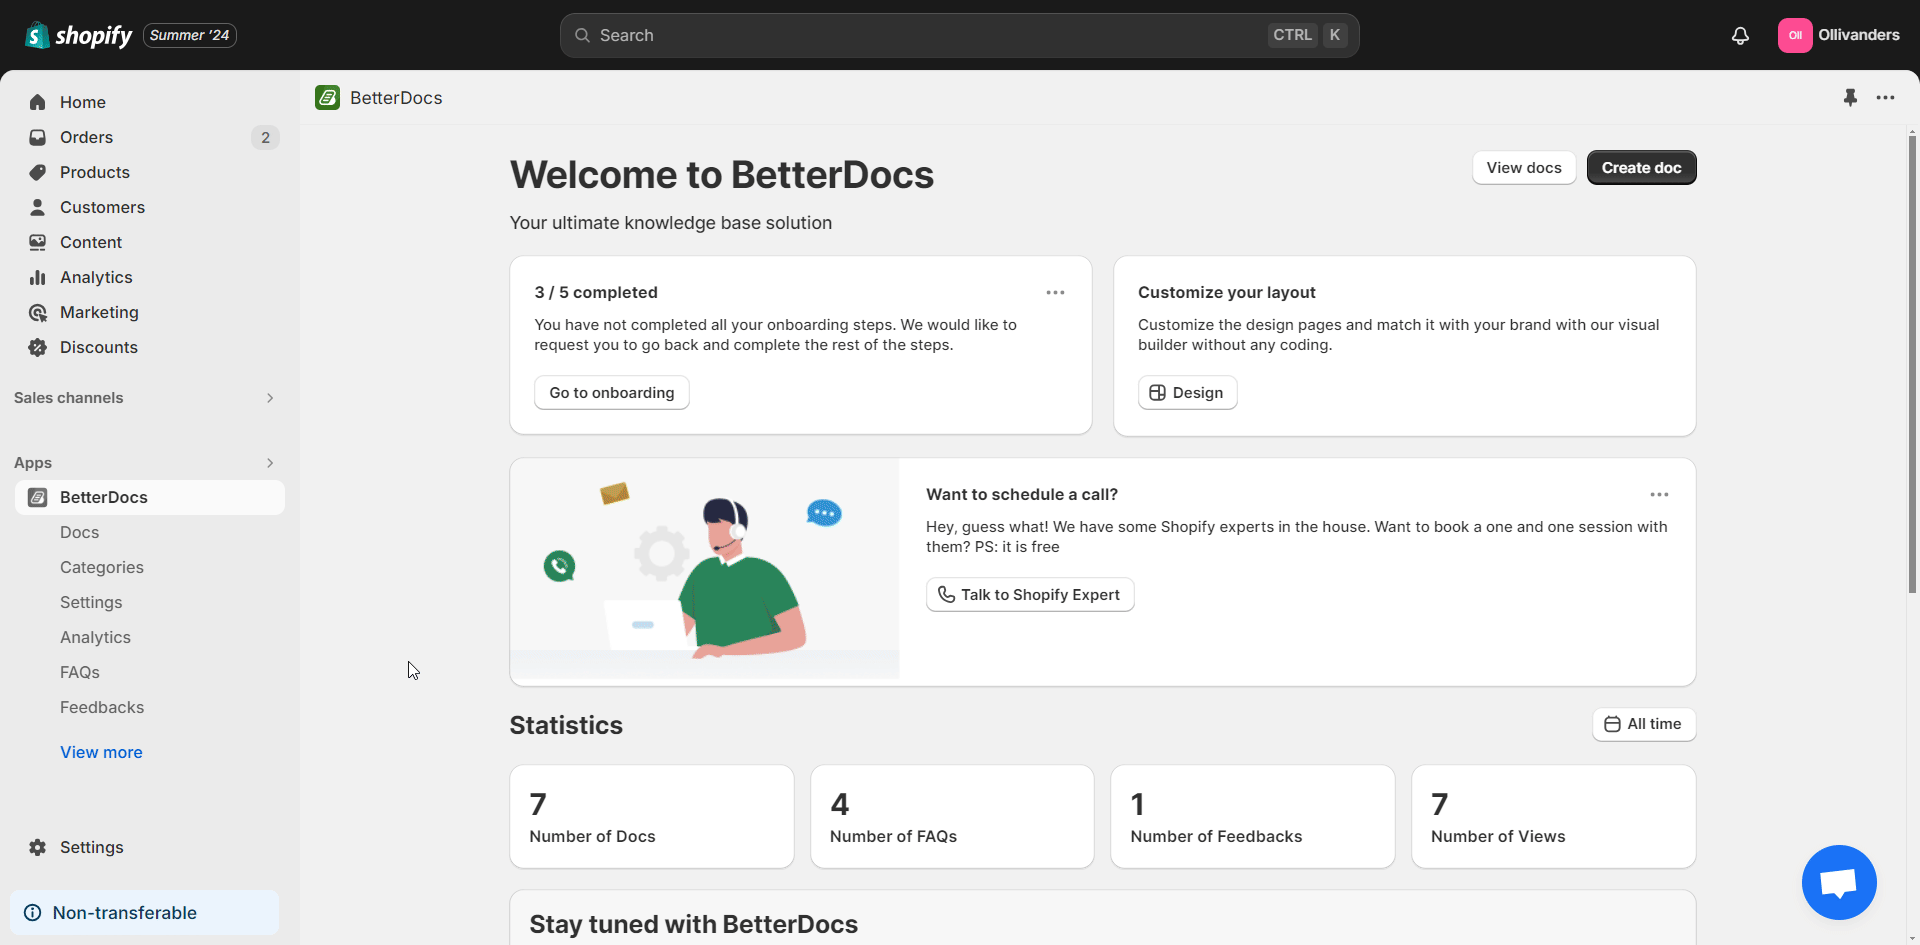 Navigate to the ‘Design FAQs’ Option in BetterDocs